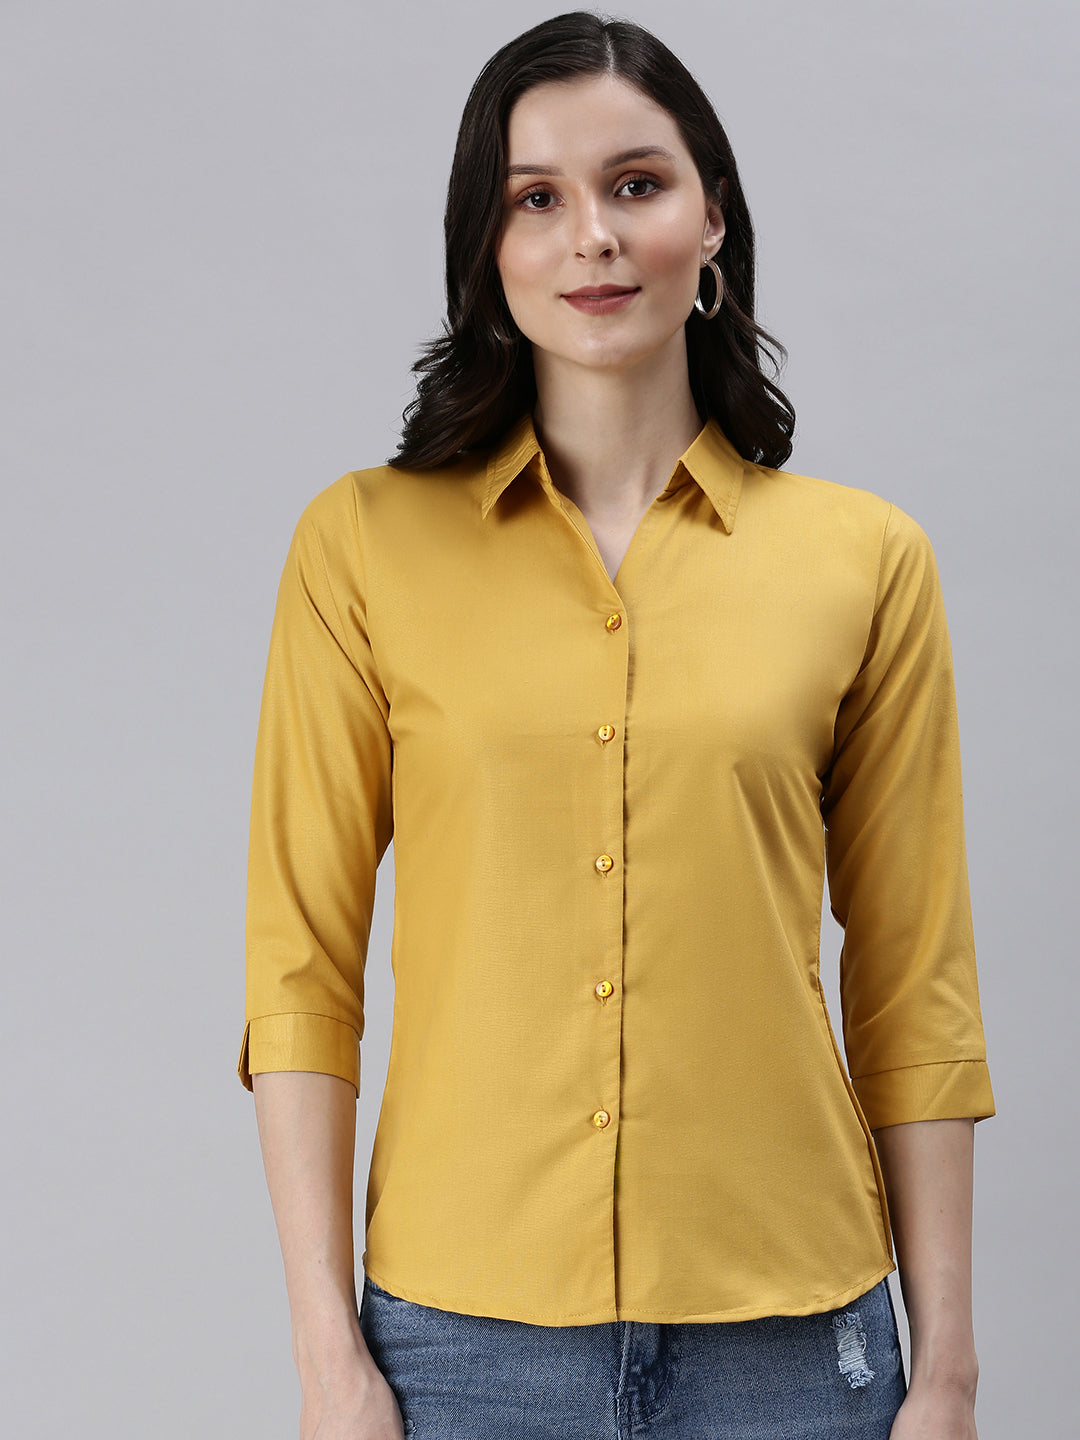 Women's Mustard Solid Casual Shirts